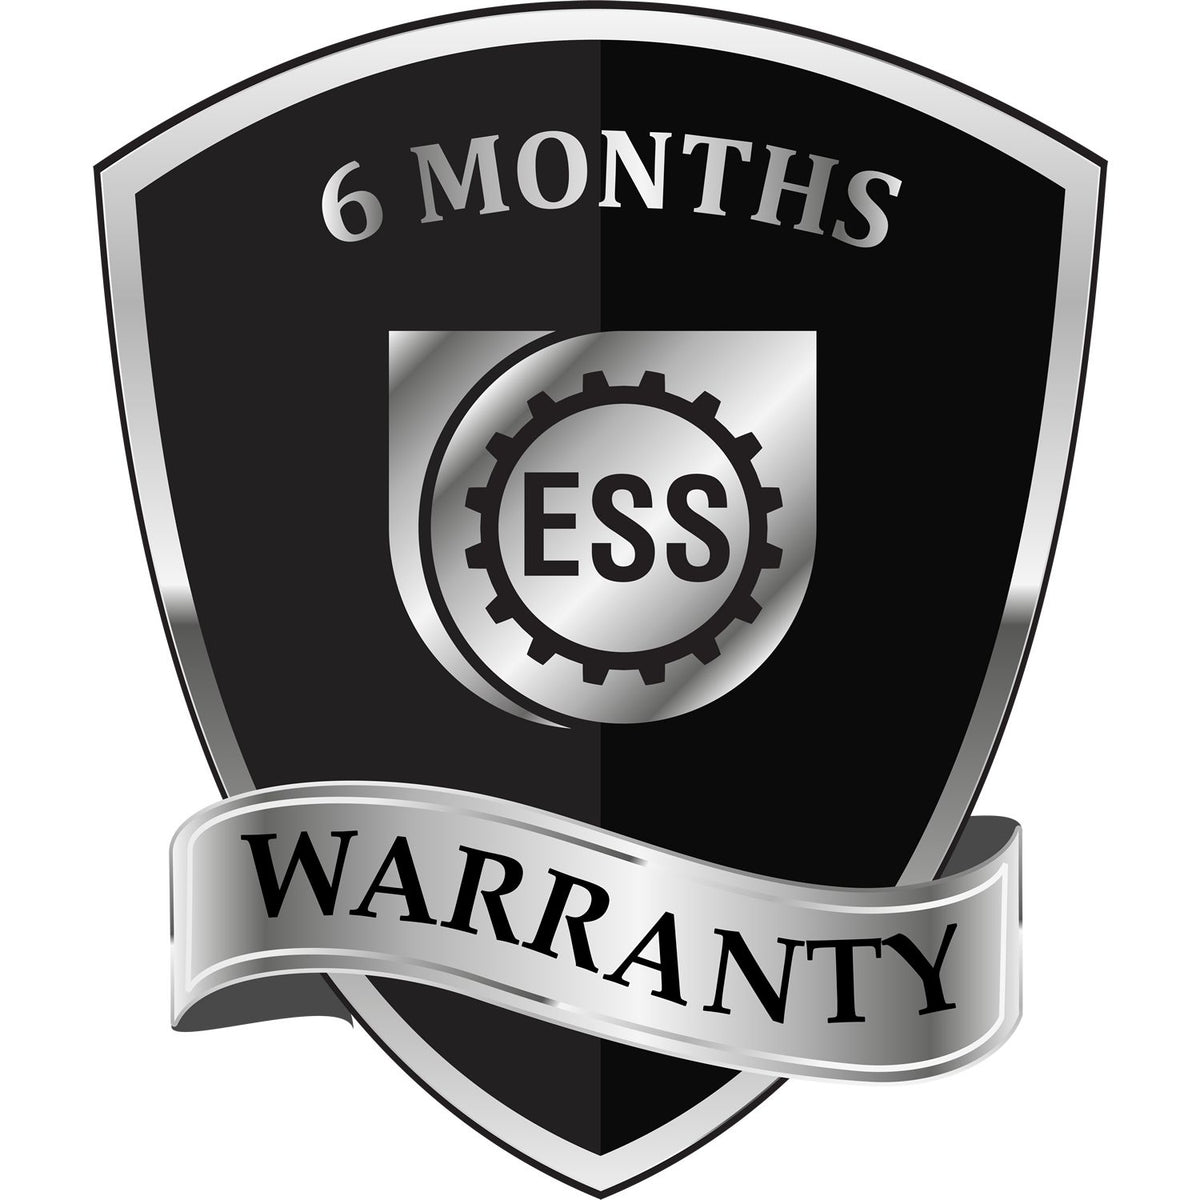 A badge or emblem showing a warranty icon for the Wyoming Professional Engineer Seal Stamp